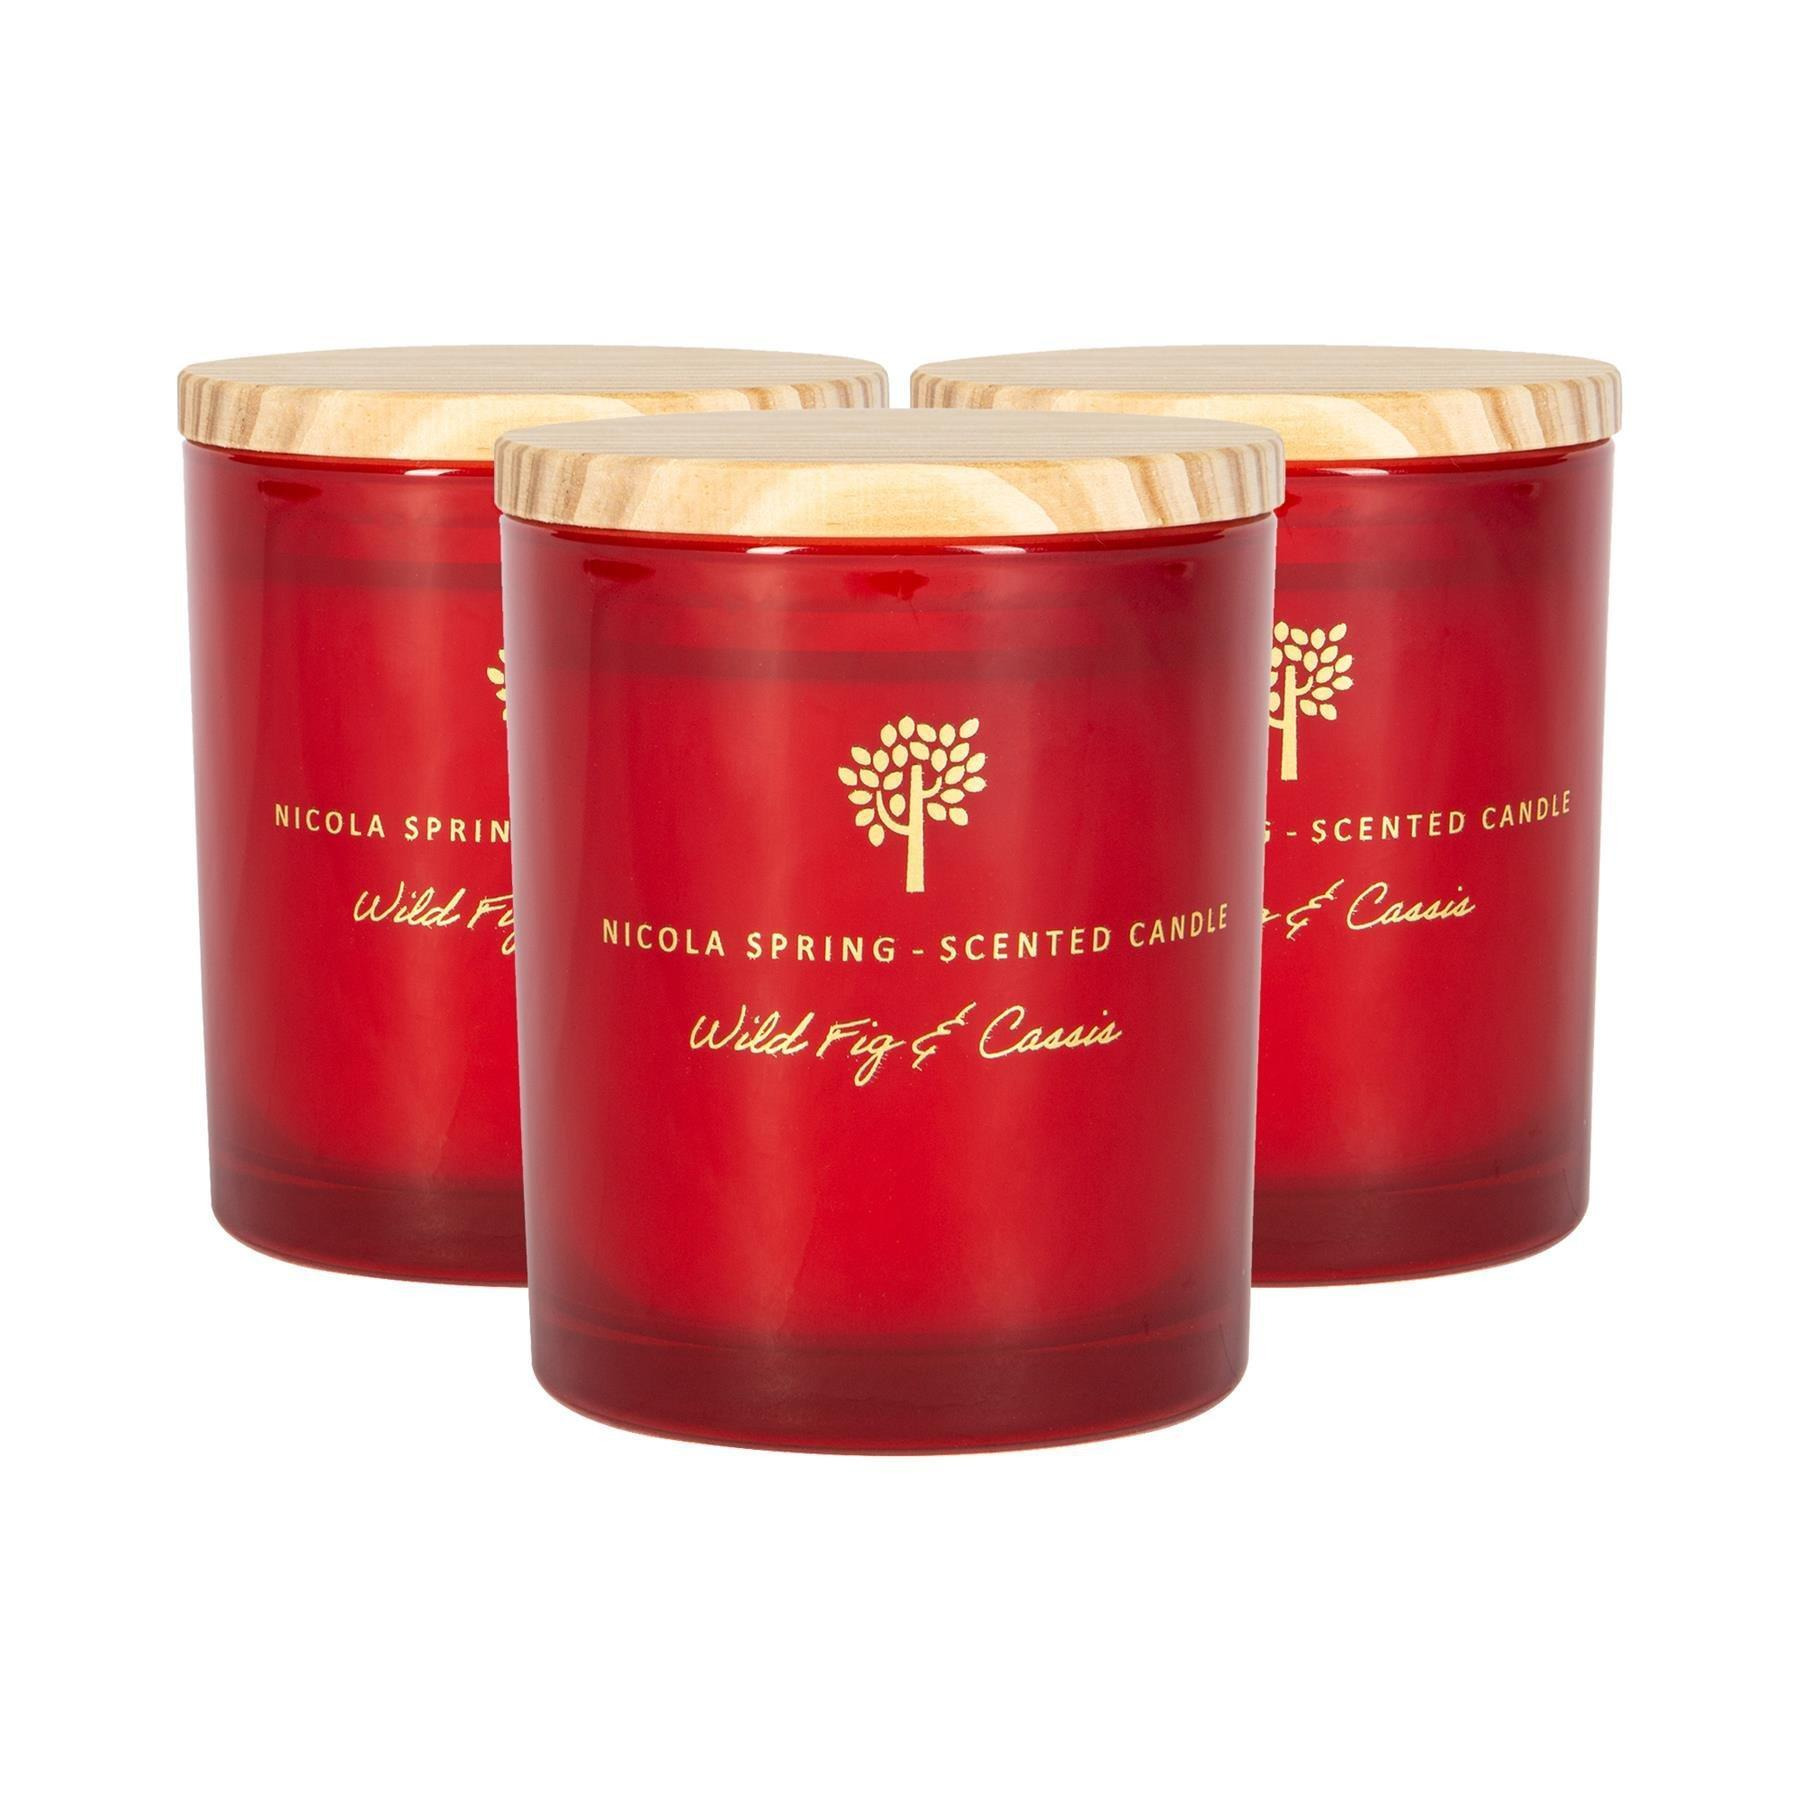 Soy Wax Scented Candles 130g Wild Fig & Cassis Pack of 3 - image 1